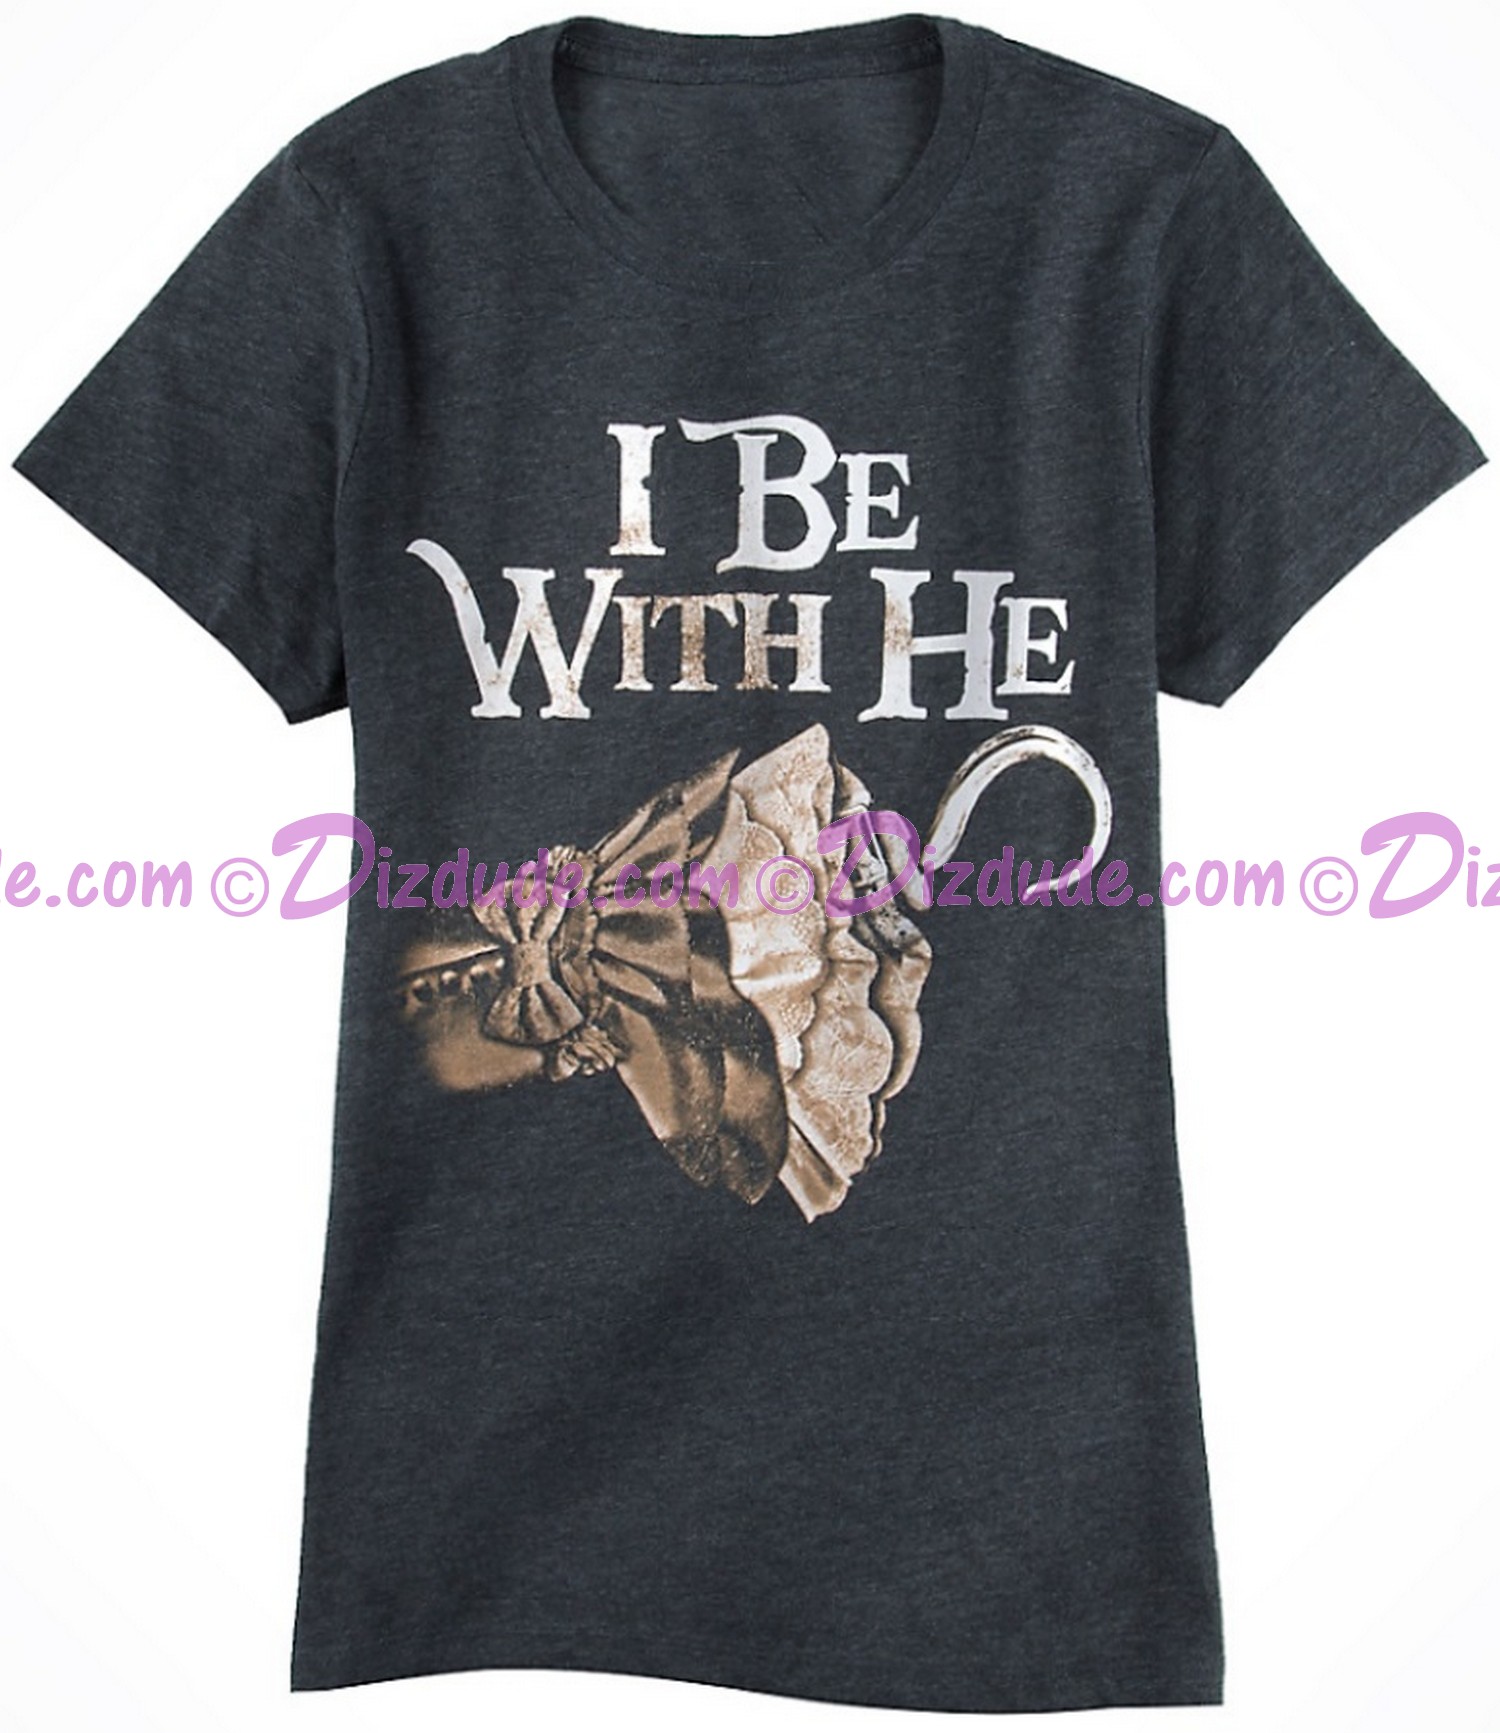 (SOLD OUT) Vintage Pirates Of The Caribbean I Be With He Companion Adult T-shirt (Tee, Tshirt or T shirt)